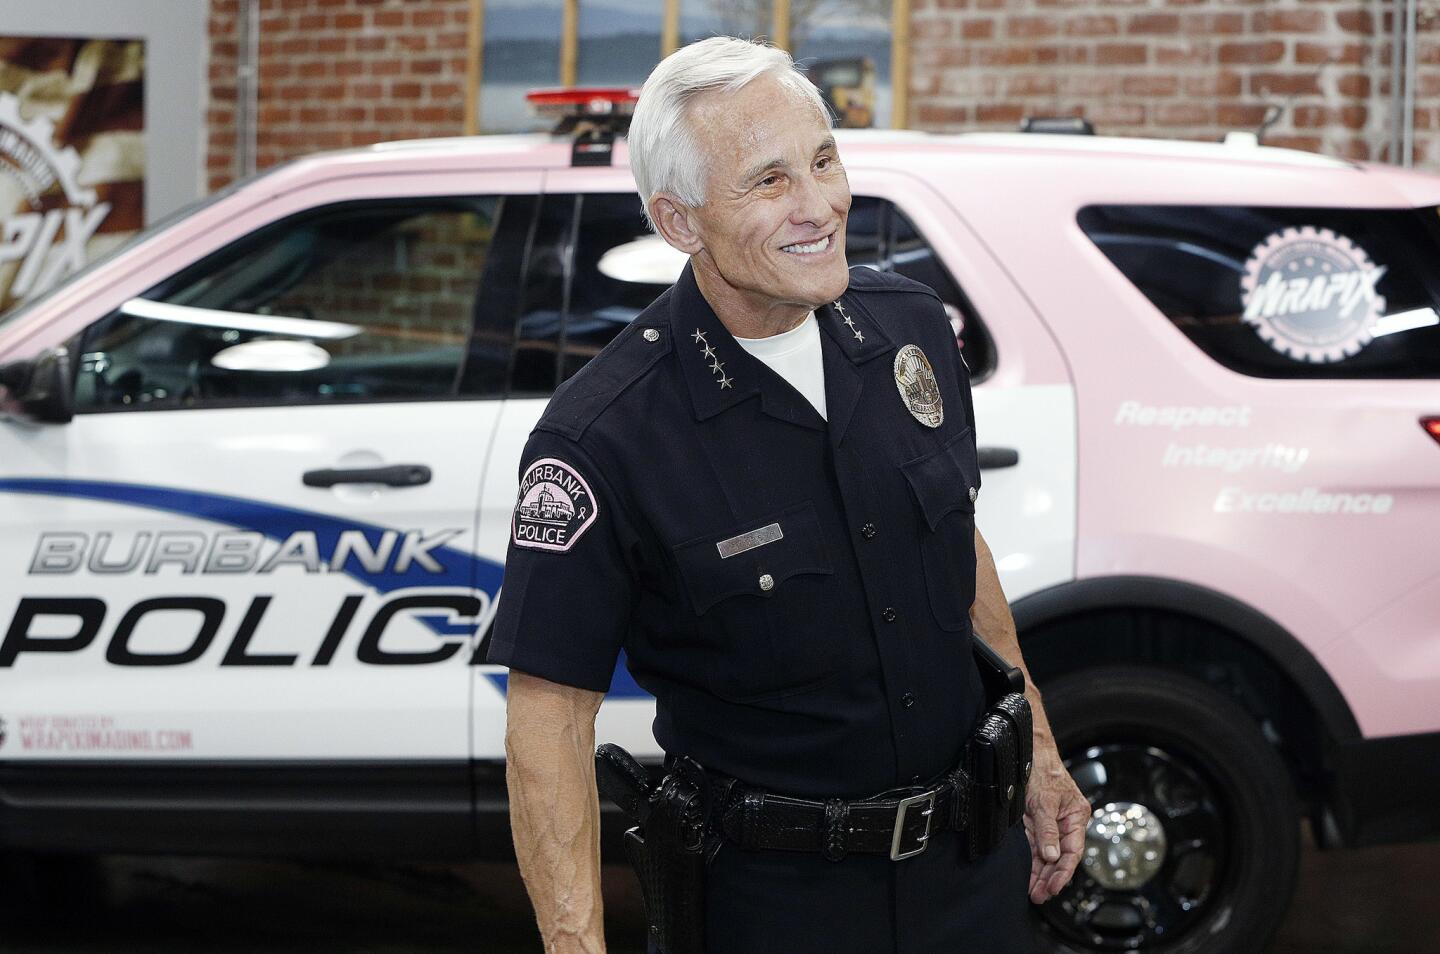 Burbank Police Chief Scott LaChasse in front of the newly wrapped pink police cruiser that was just unveiled for the Burbank Police Department at Wrapix in Burbank on Wednesday, September 26, 2018. The pink police cruiser, prepared by Wrapix who absorbed the expense, will be part of the Burbank Police Departments' recognition of Breast Cancer Awareness month in October, along with pink police emblems on each arm of the officer's uniform.